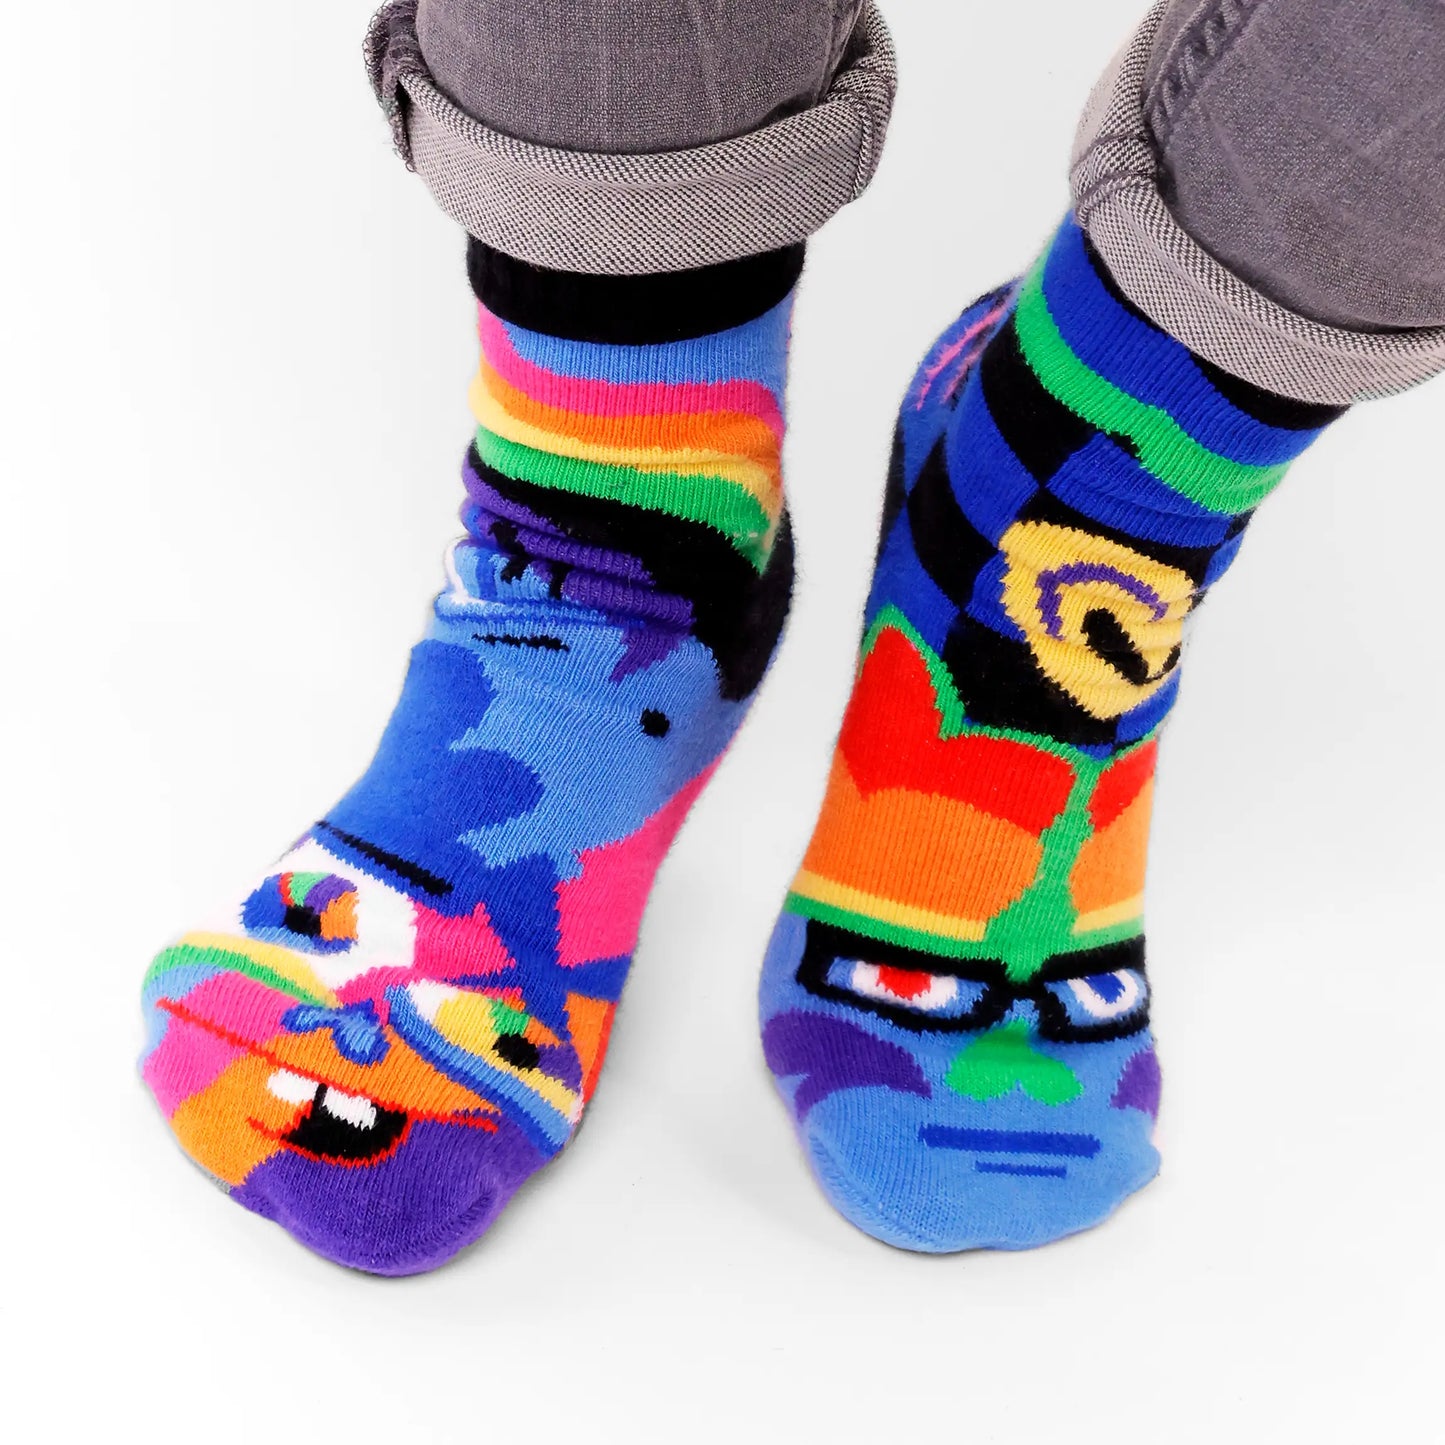 Silly & Serious | Kids Collectible Socks by Jason Naylor